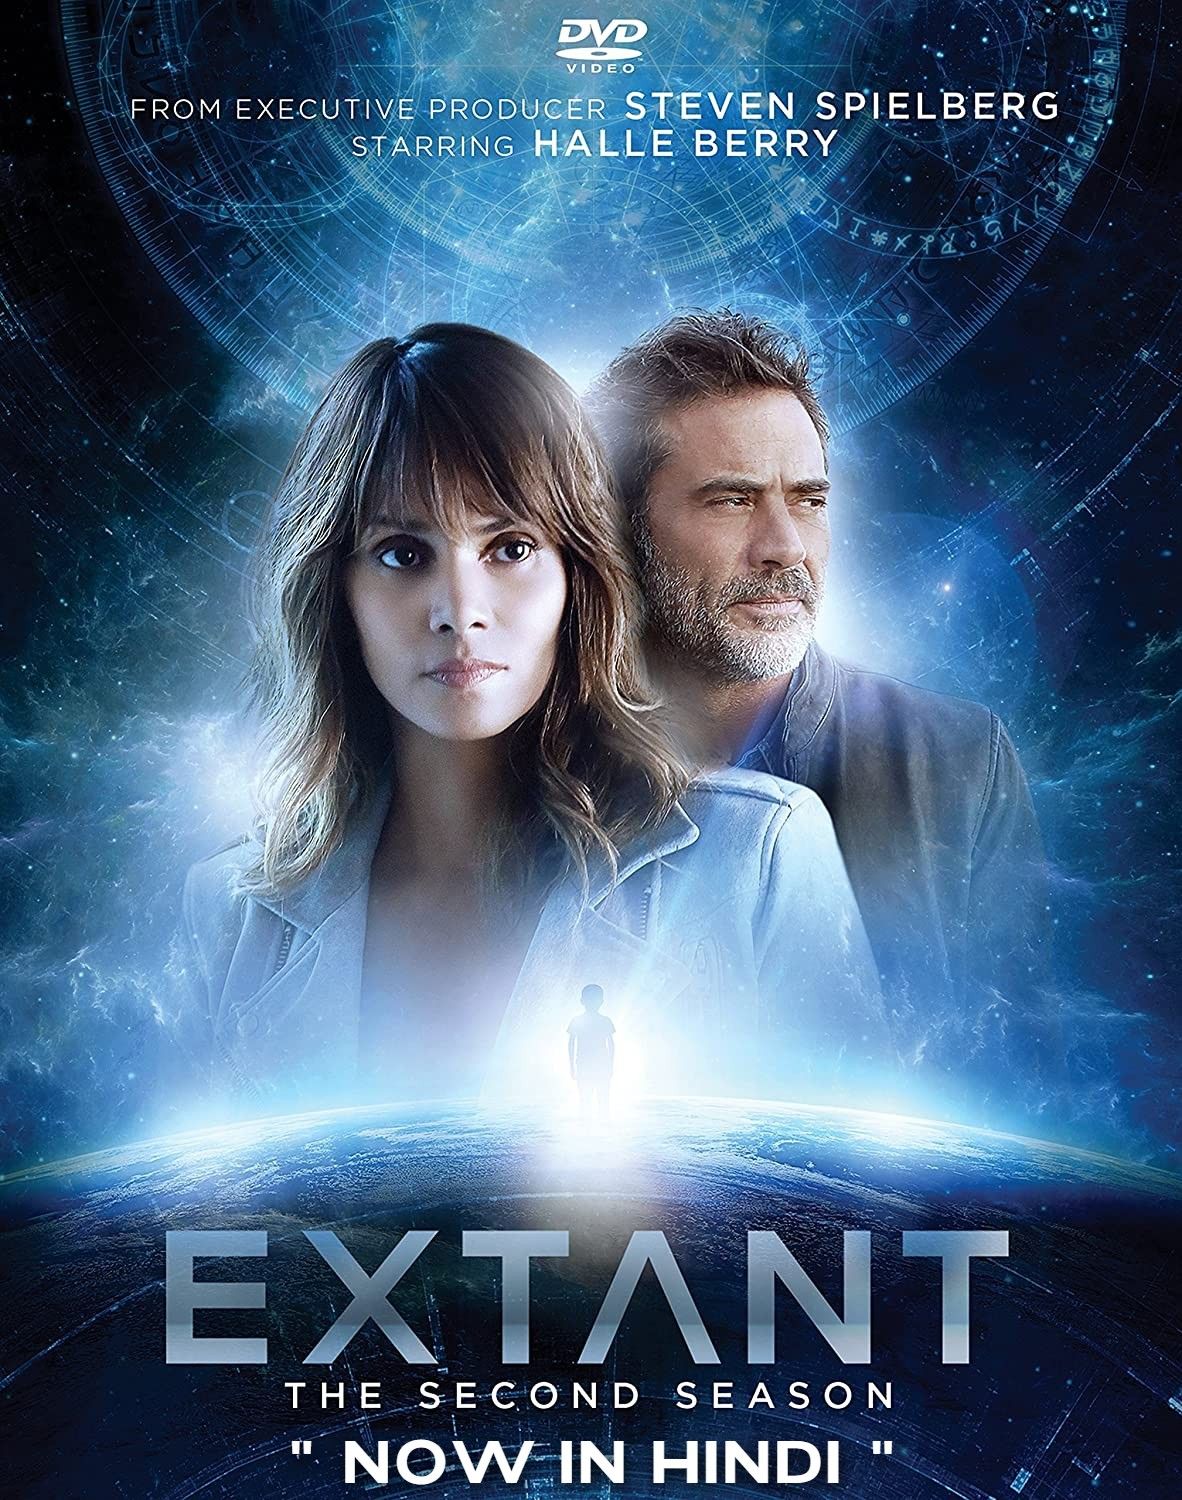 Extant (Season 2) Hindi Dubbed Complete All Episodes download full movie